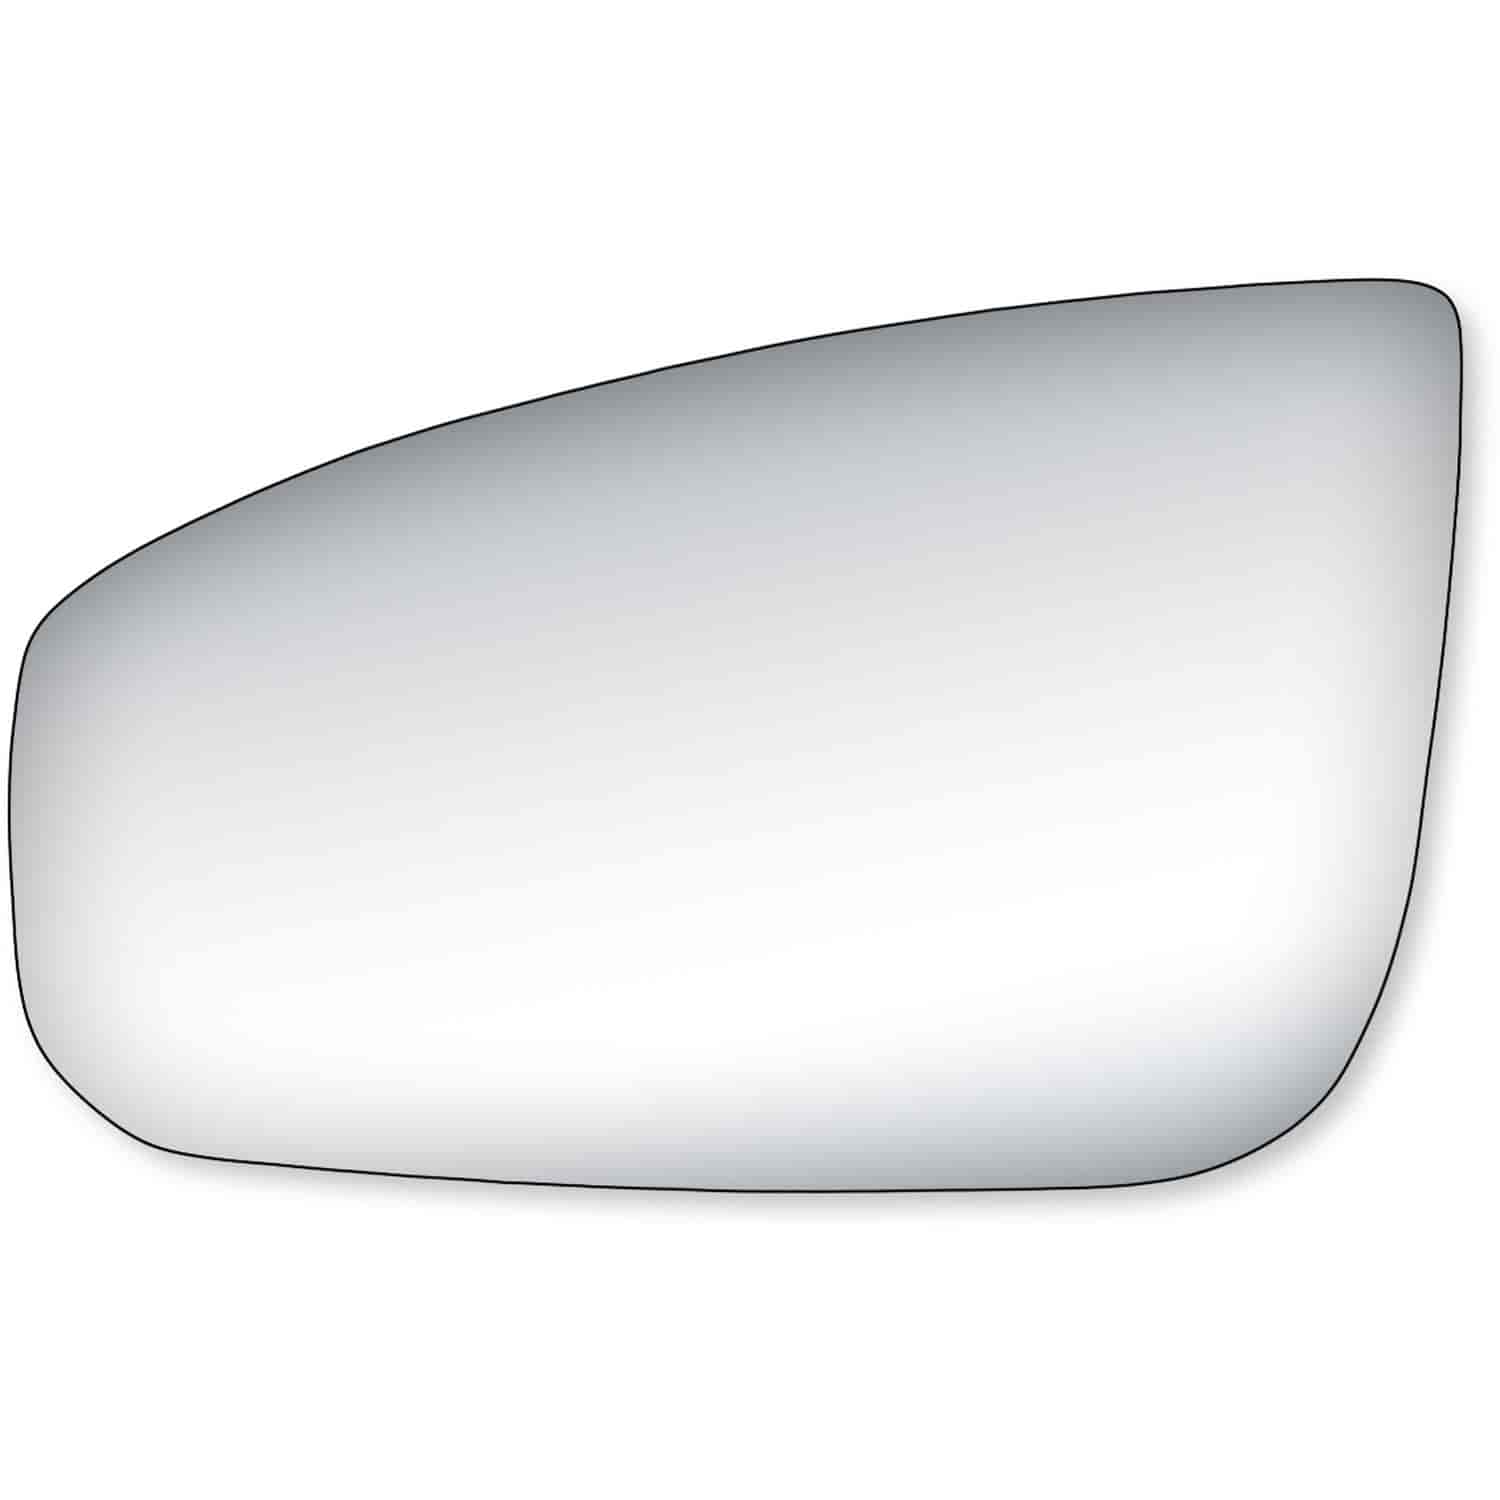 Replacement Glass for 04-08 Maxima w/auto dimming the glass measures 4 1/16 tall by 6 1/2 wide and 7